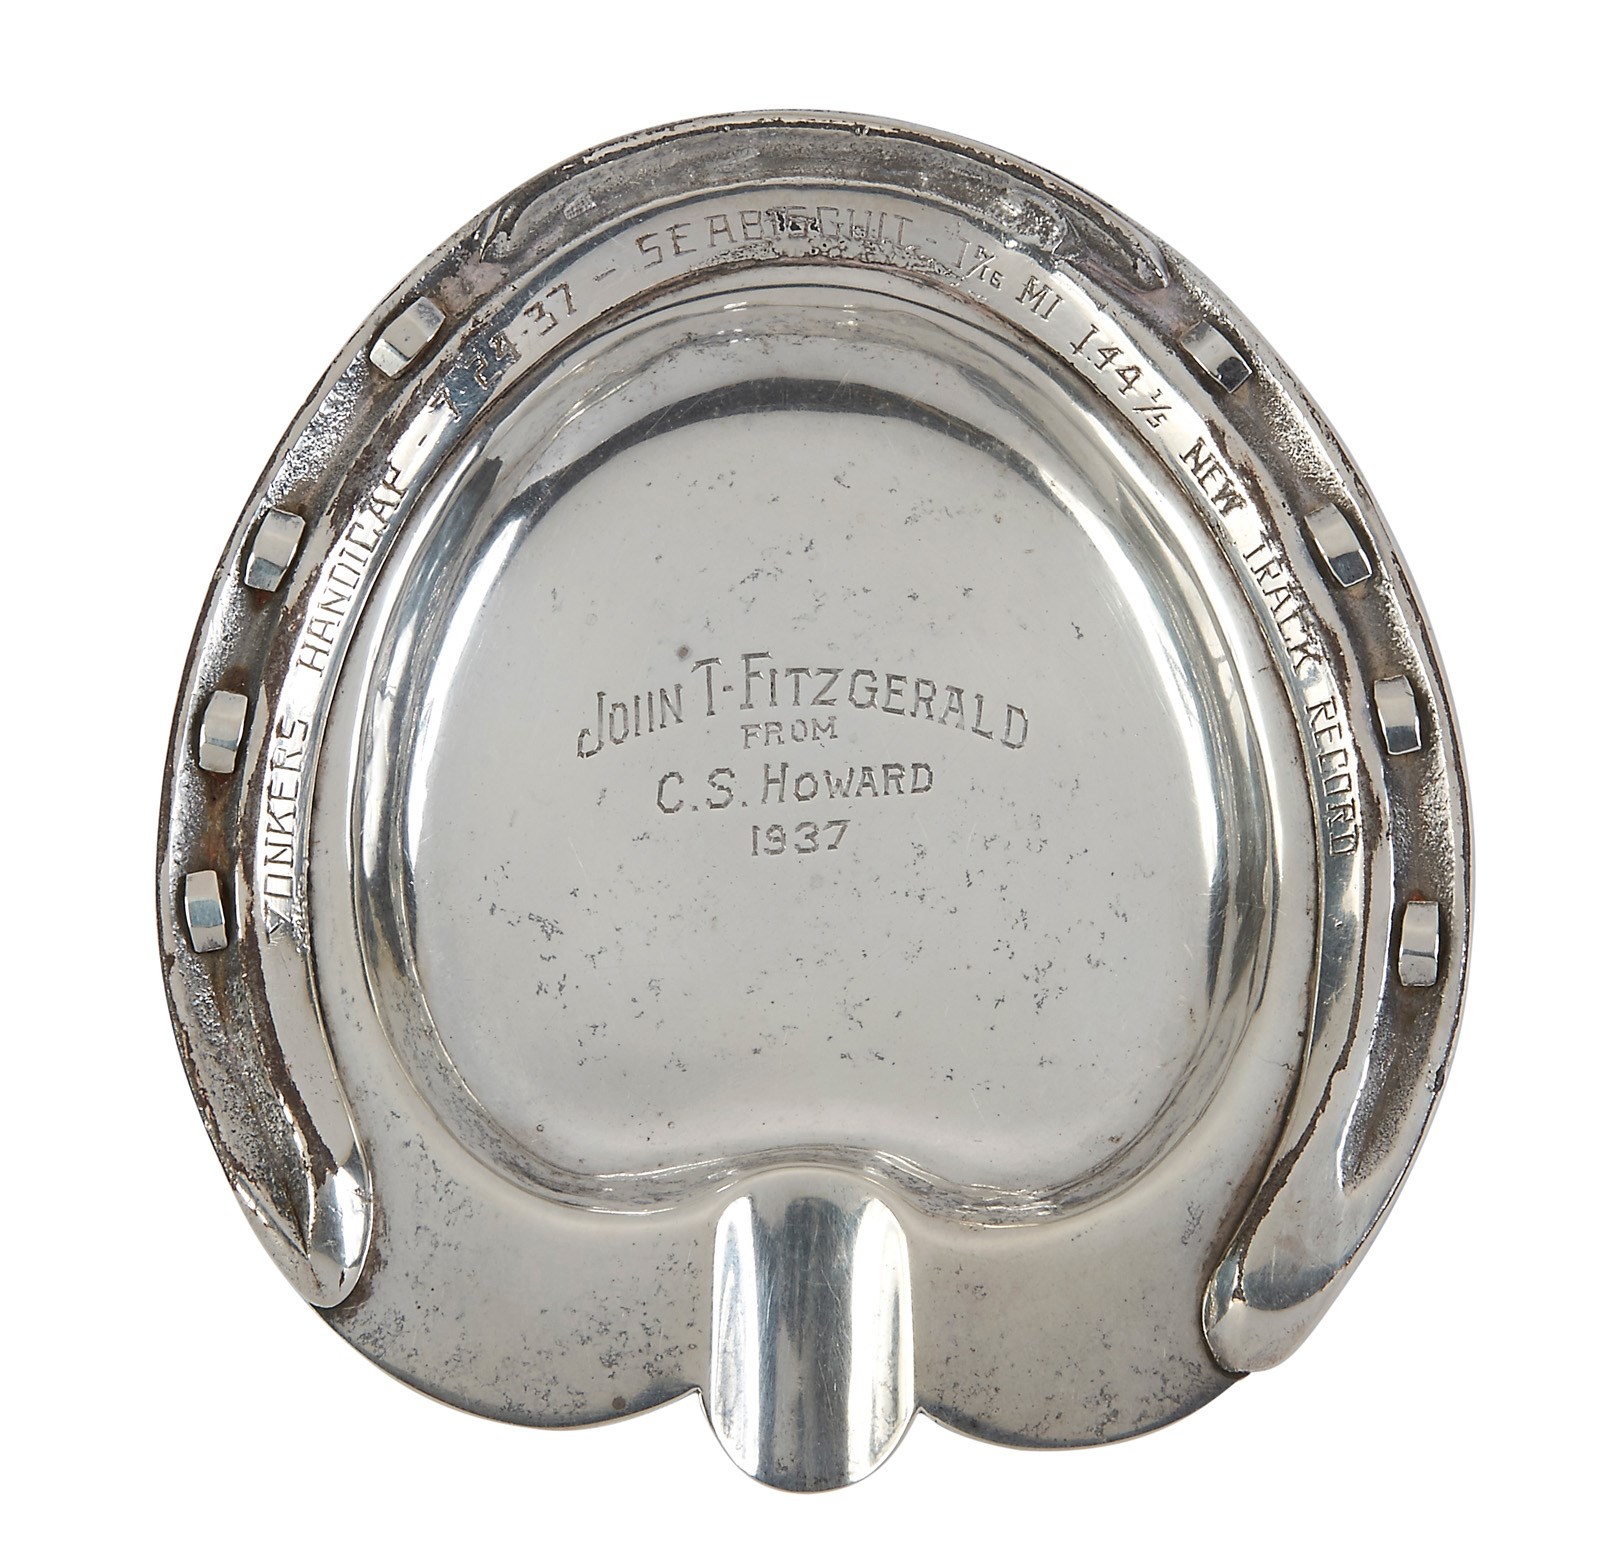 - 1937 Seabiscuit Race-Worn Horseshoe Silver Ashtray Gifted by C.S. Howard